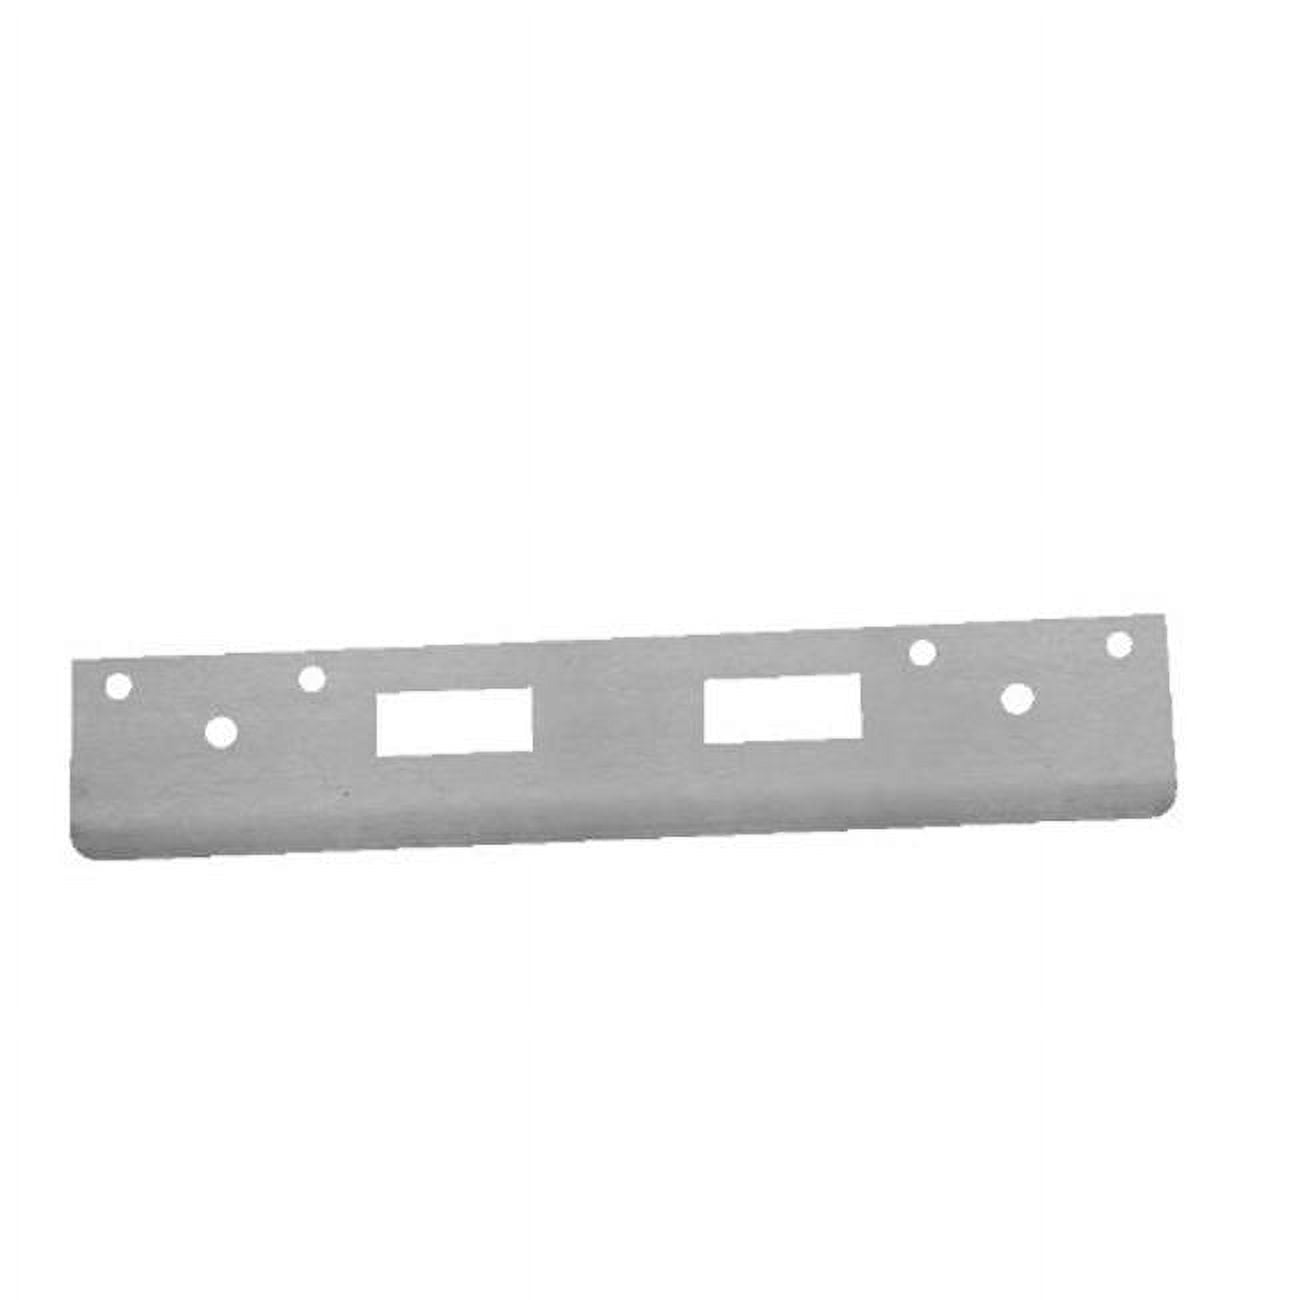 12 In. Full Lip High Security Strike With 4 In. Ctc Latch Holes, Silver Coated